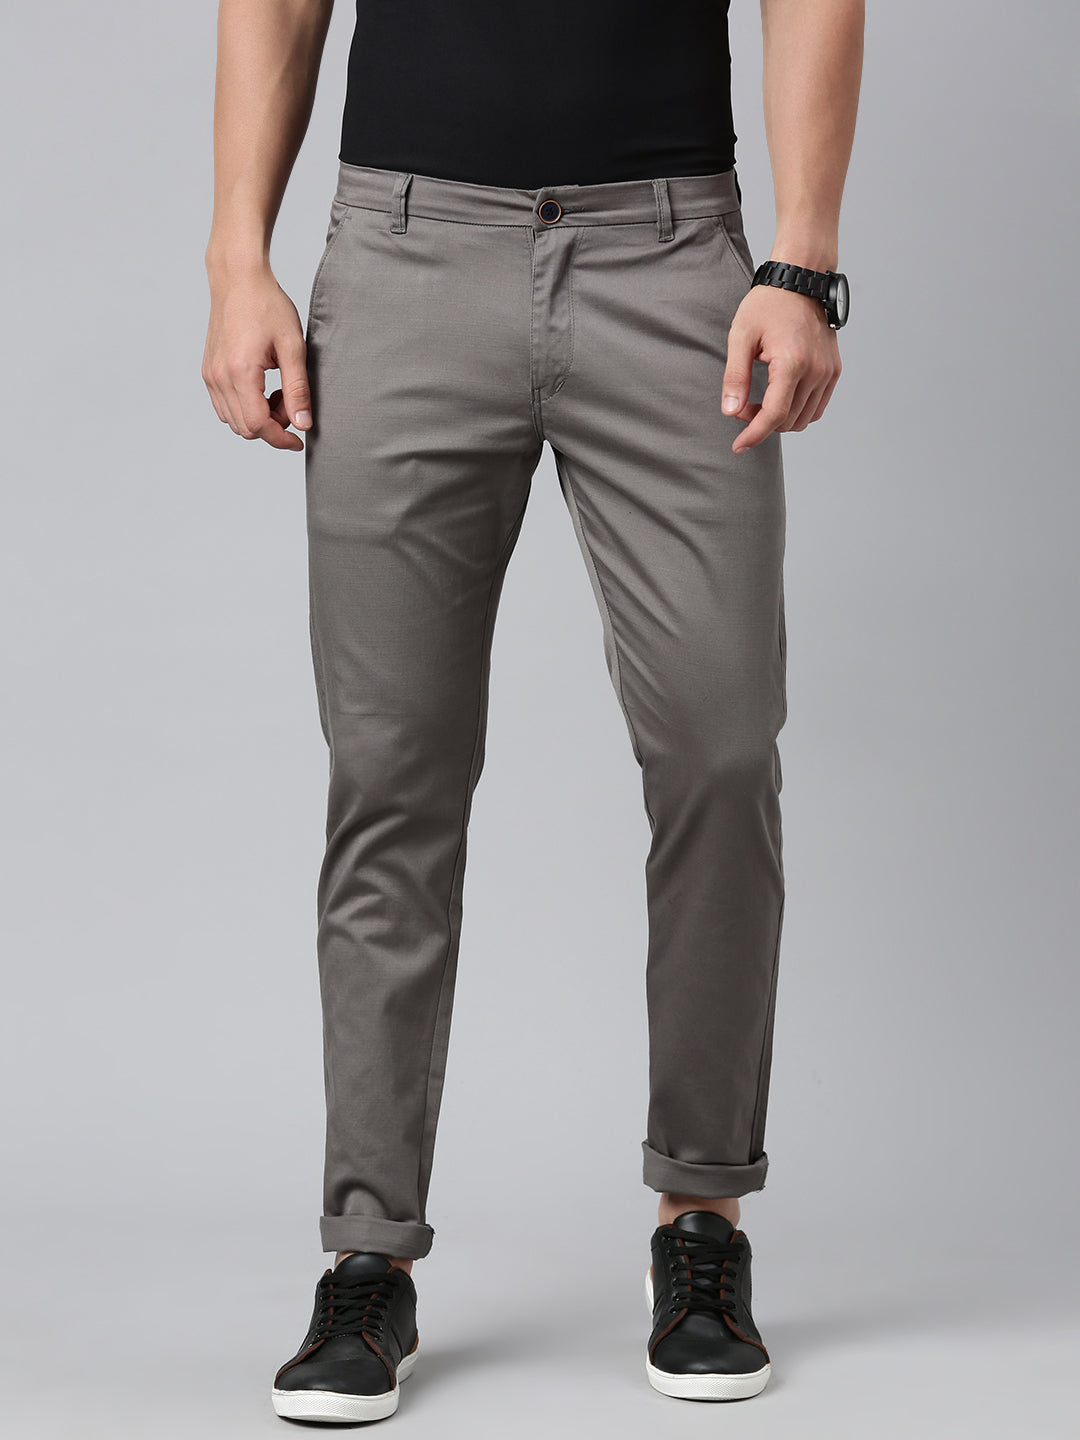 Classic Men's Trousers for Effortless Style - Dark Grey